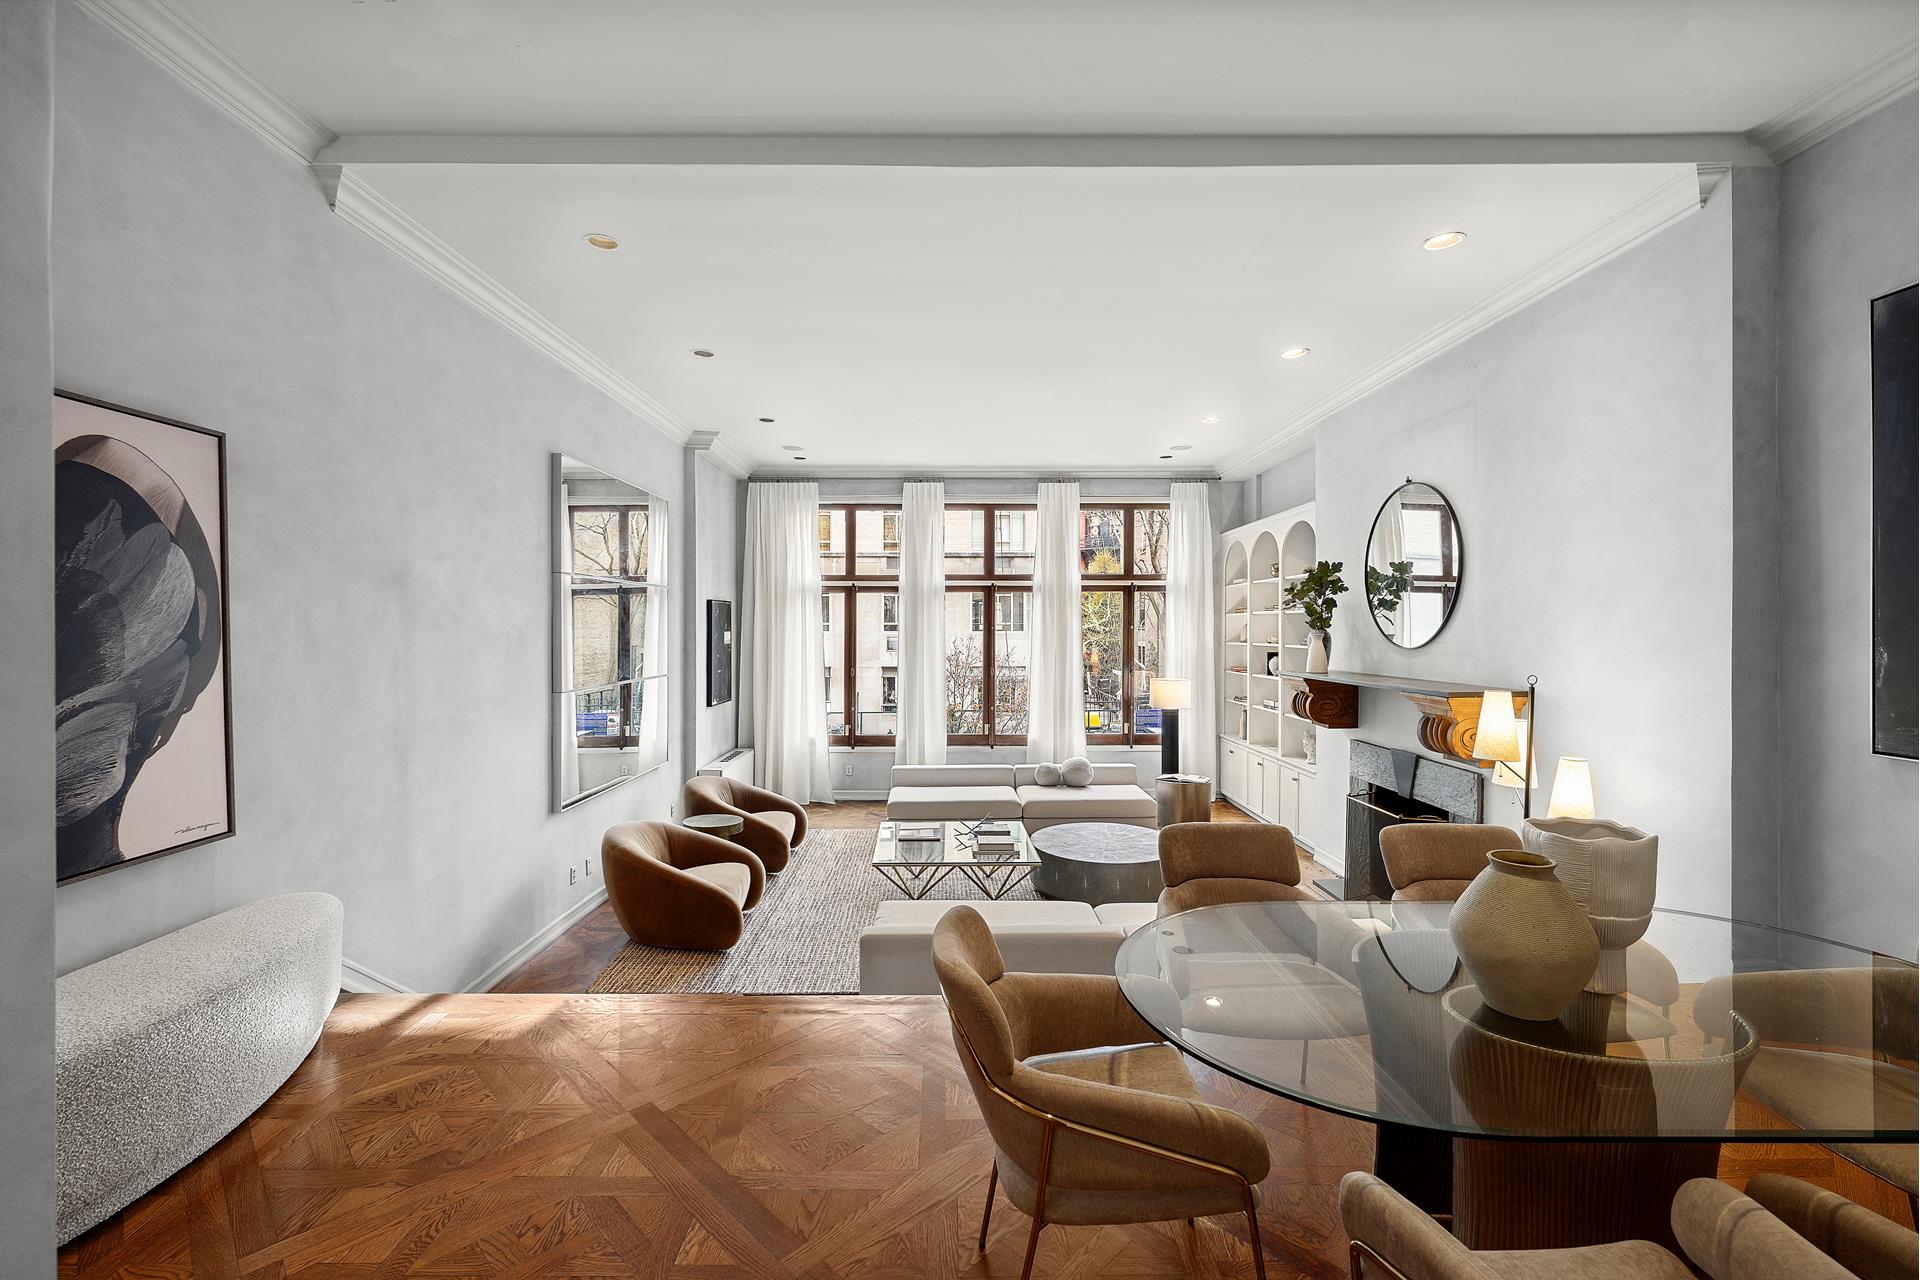 6 East 68th Street 2, Lenox Hill, Upper East Side, NYC - 2 Bedrooms  
2.5 Bathrooms  
5 Rooms - 